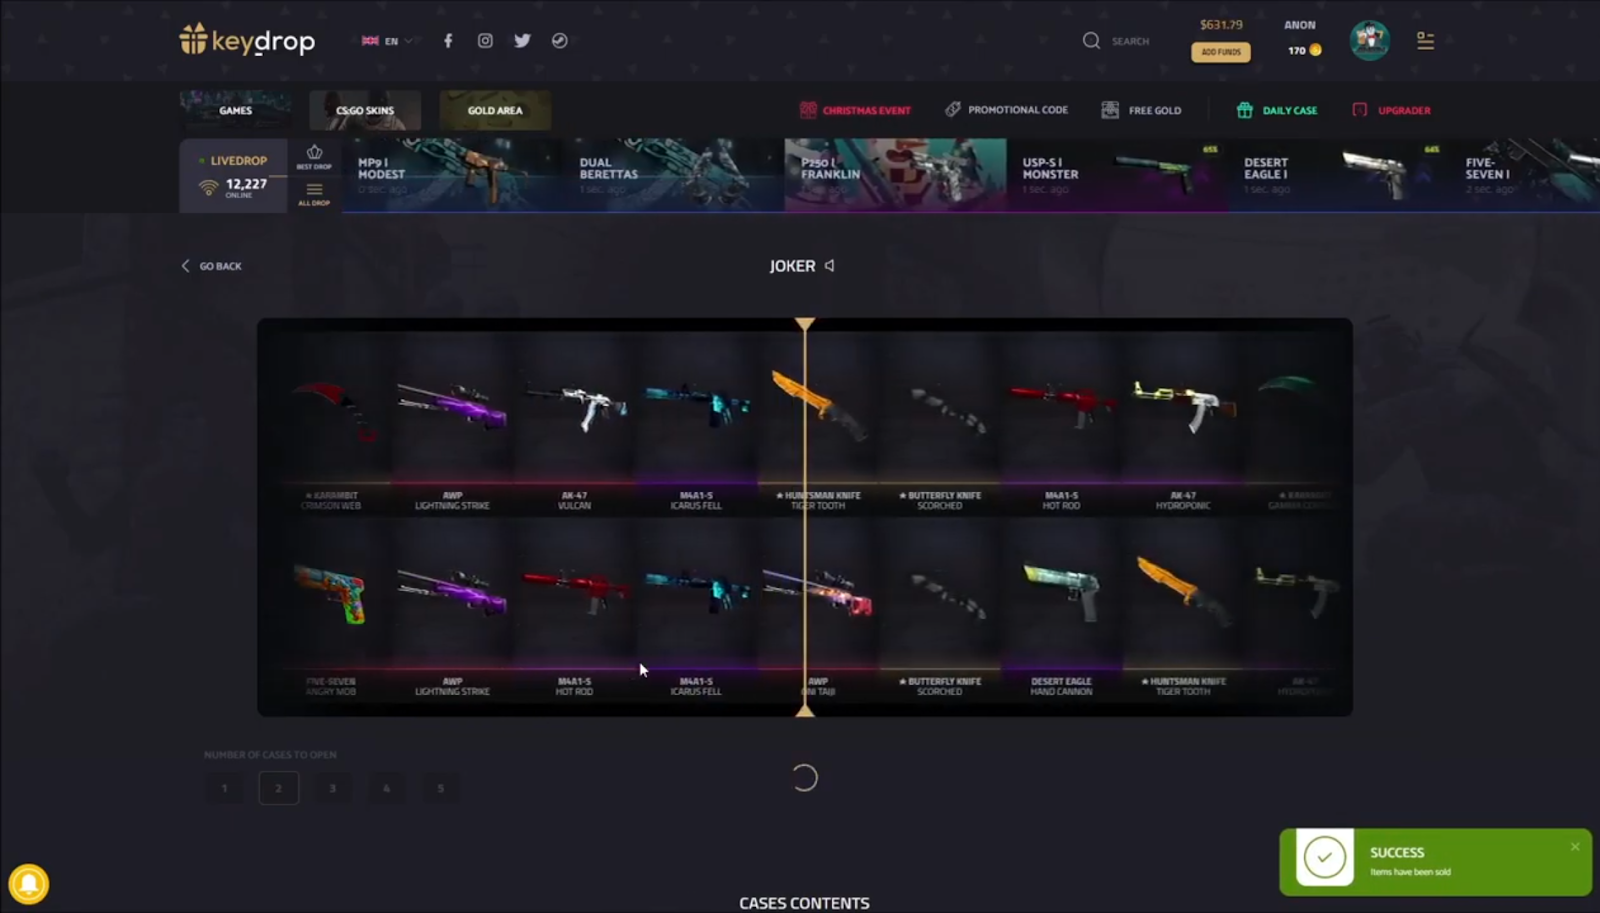 How to Gamble on CSGO Gambling Sites in 2023?